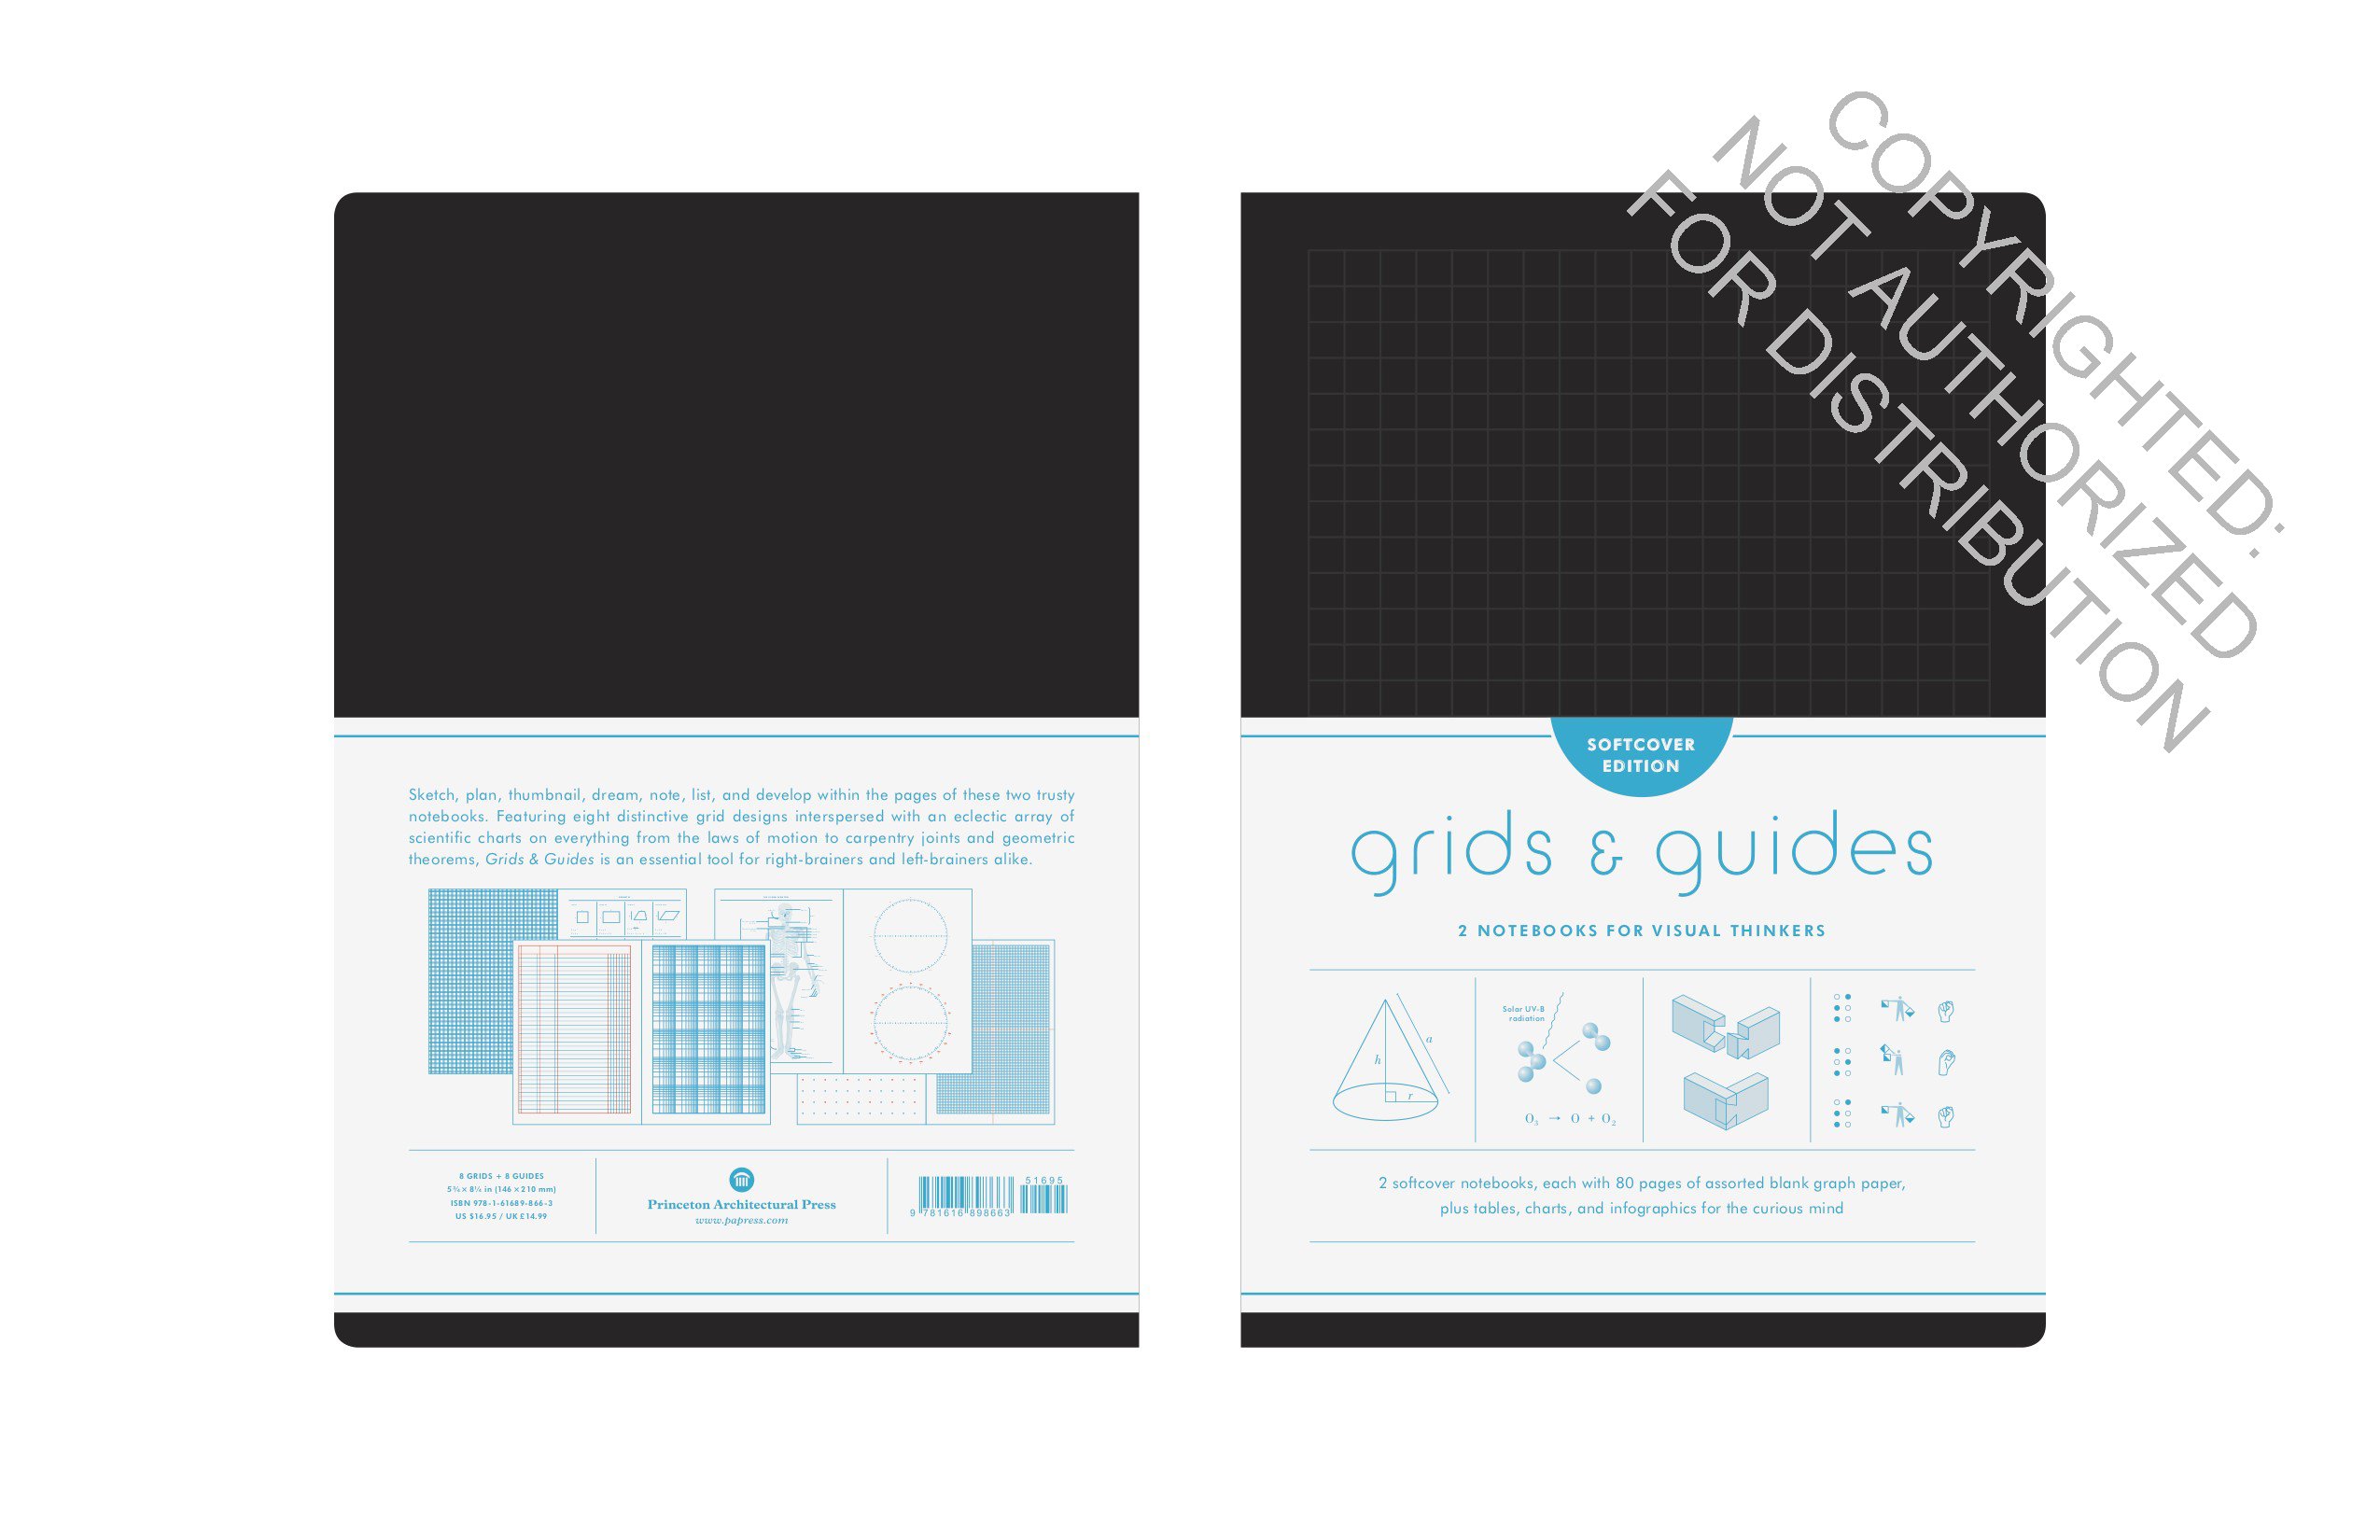 Grids & Guides Softcover (Black)